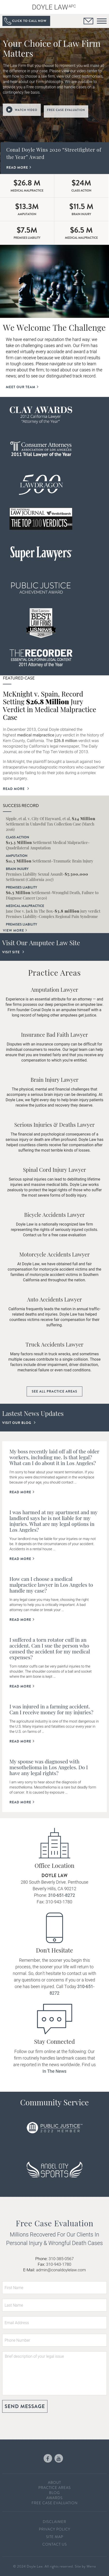 Doyle Law - Beverly Hills CA Lawyers